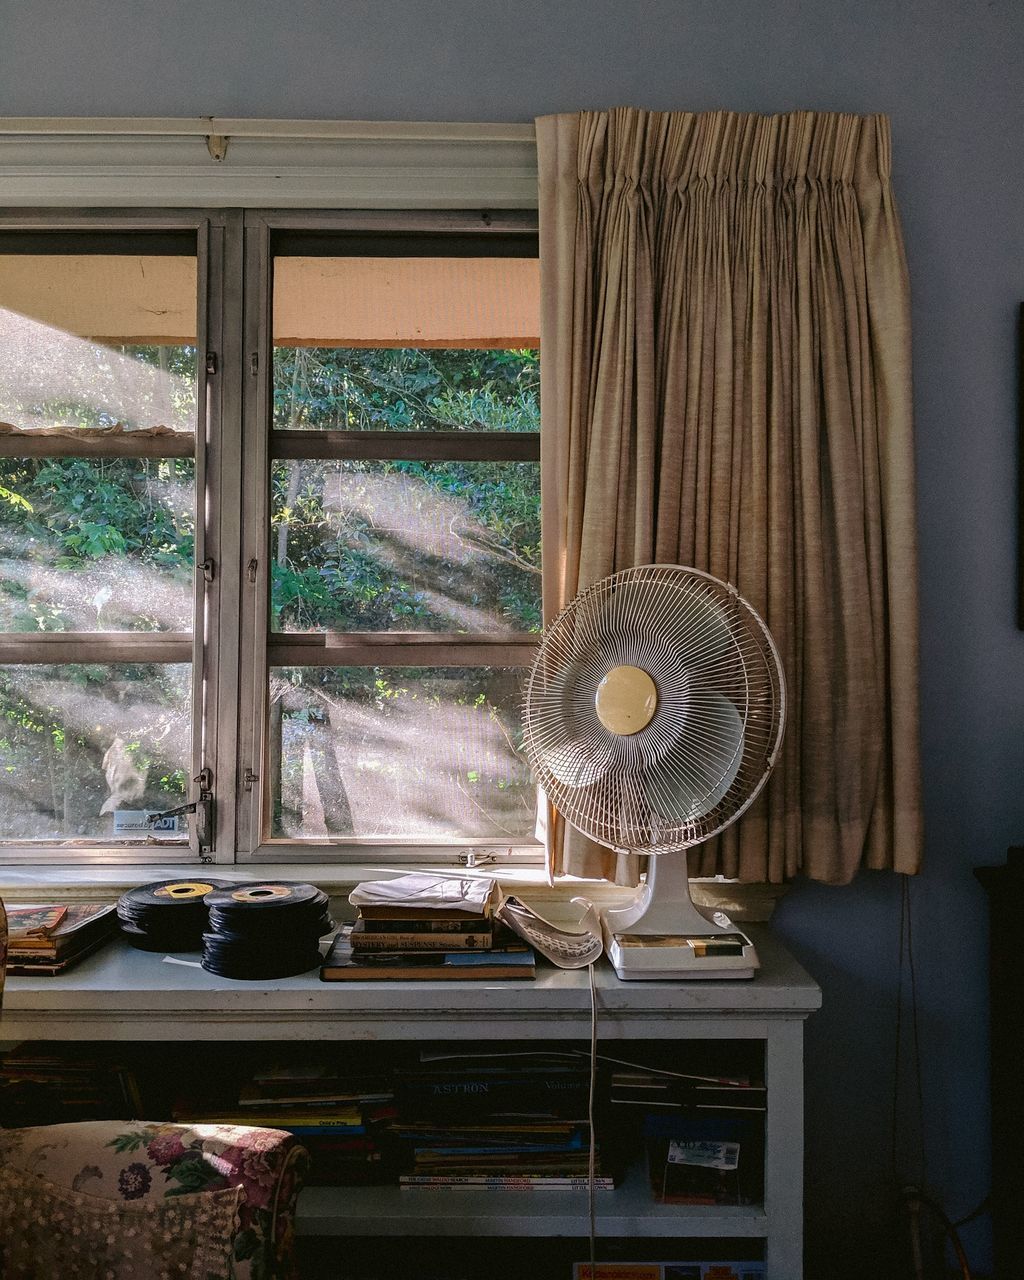 window, indoors, table, no people, home interior, day, transparent, fan, glass - material, furniture, electric fan, curtain, hanging, wood - material, still life, water, nature, technology, electric lamp, ceiling